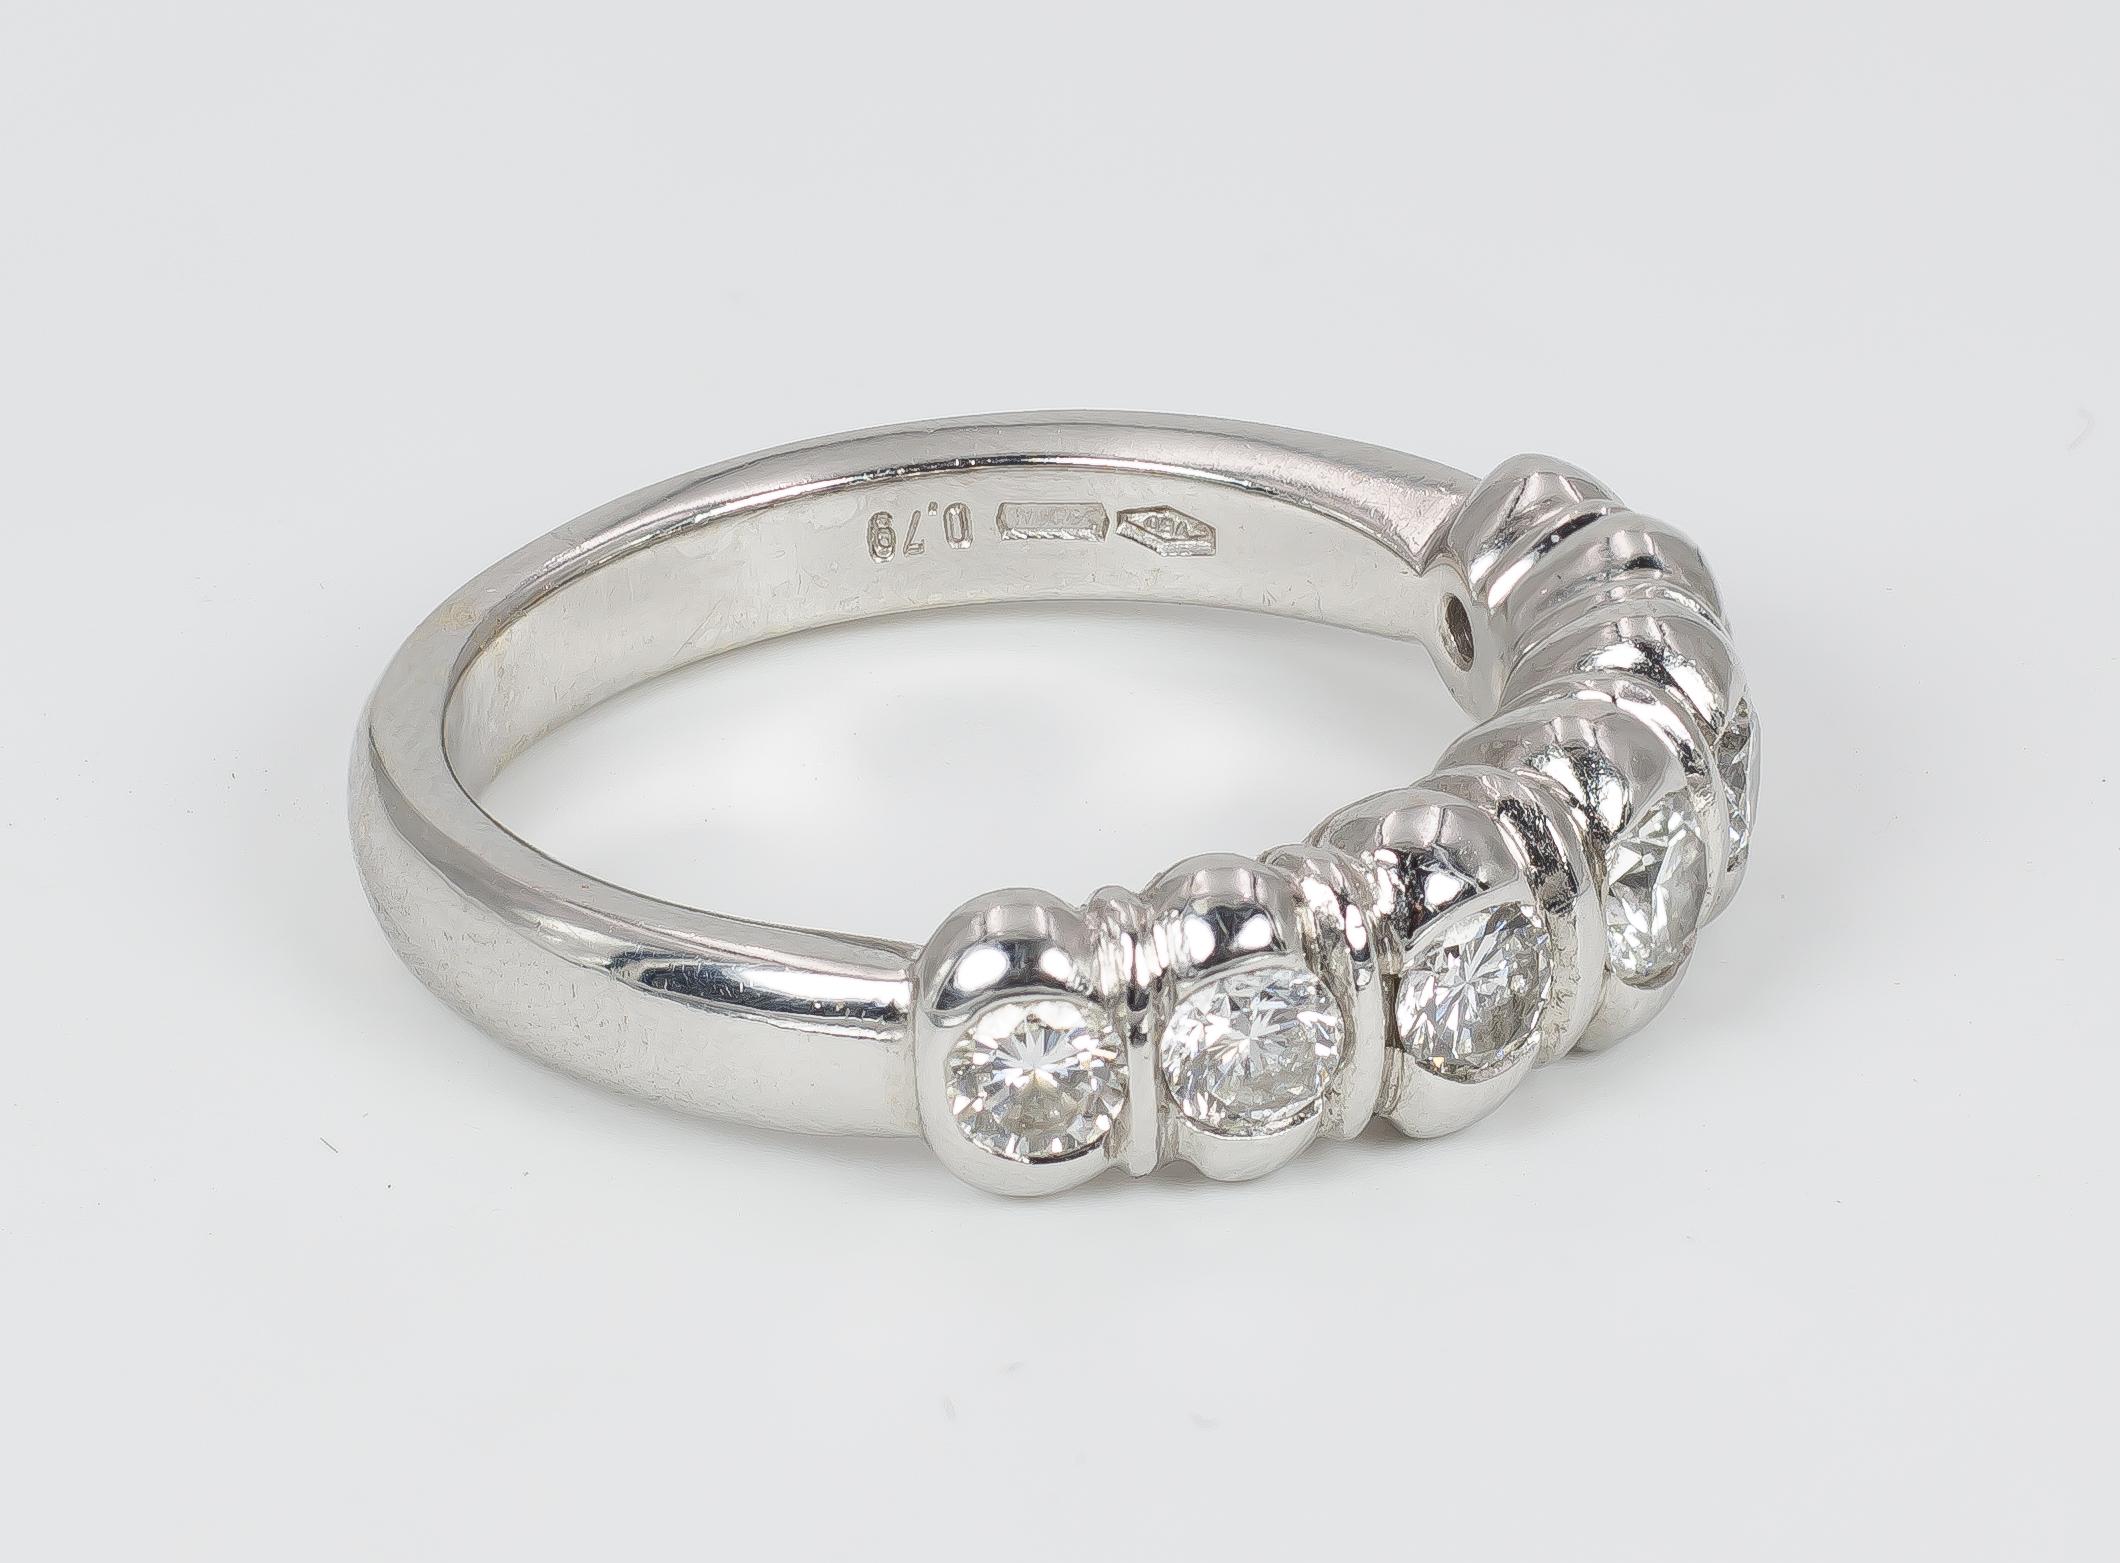 A spectacular vintage Damiani ring, crafted in 18K white gold throughout and set with seven round cut diamonds, totalling 0.75ct ca. The diamonds are placed in a curved gold mount, that gives to the ring a nice shape. 

MATERIALS
18K white gold and